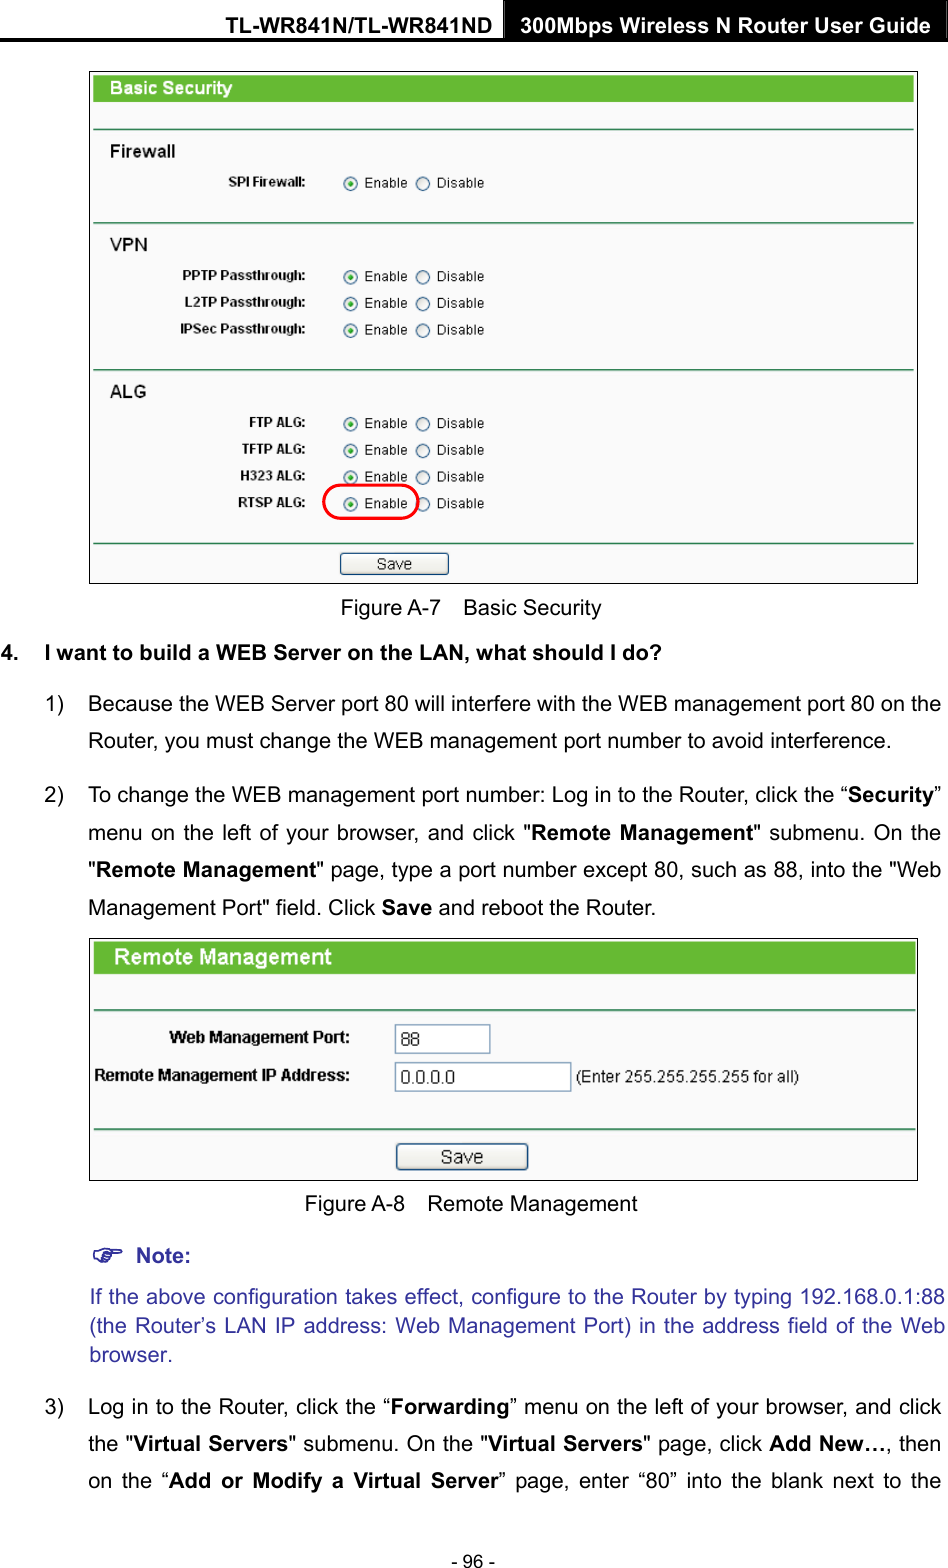 TL-WR841N/TL-WR841ND 300Mbps Wireless N Router User Guide - 96 -  Figure A-7  Basic Security 4.  I want to build a WEB Server on the LAN, what should I do? 1)  Because the WEB Server port 80 will interfere with the WEB management port 80 on the Router, you must change the WEB management port number to avoid interference. 2)  To change the WEB management port number: Log in to the Router, click the “Security” menu on the left of your browser, and click &quot;Remote Management&quot; submenu. On the &quot;Remote Management&quot; page, type a port number except 80, such as 88, into the &quot;Web Management Port&quot; field. Click Save and reboot the Router.  Figure A-8  Remote Management ) Note: If the above configuration takes effect, configure to the Router by typing 192.168.0.1:88 (the Router’s LAN IP address: Web Management Port) in the address field of the Web browser. 3)  Log in to the Router, click the “Forwarding” menu on the left of your browser, and click the &quot;Virtual Servers&quot; submenu. On the &quot;Virtual Servers&quot; page, click Add New…, then on the “Add or Modify a Virtual Server” page, enter “80” into the blank next to the 